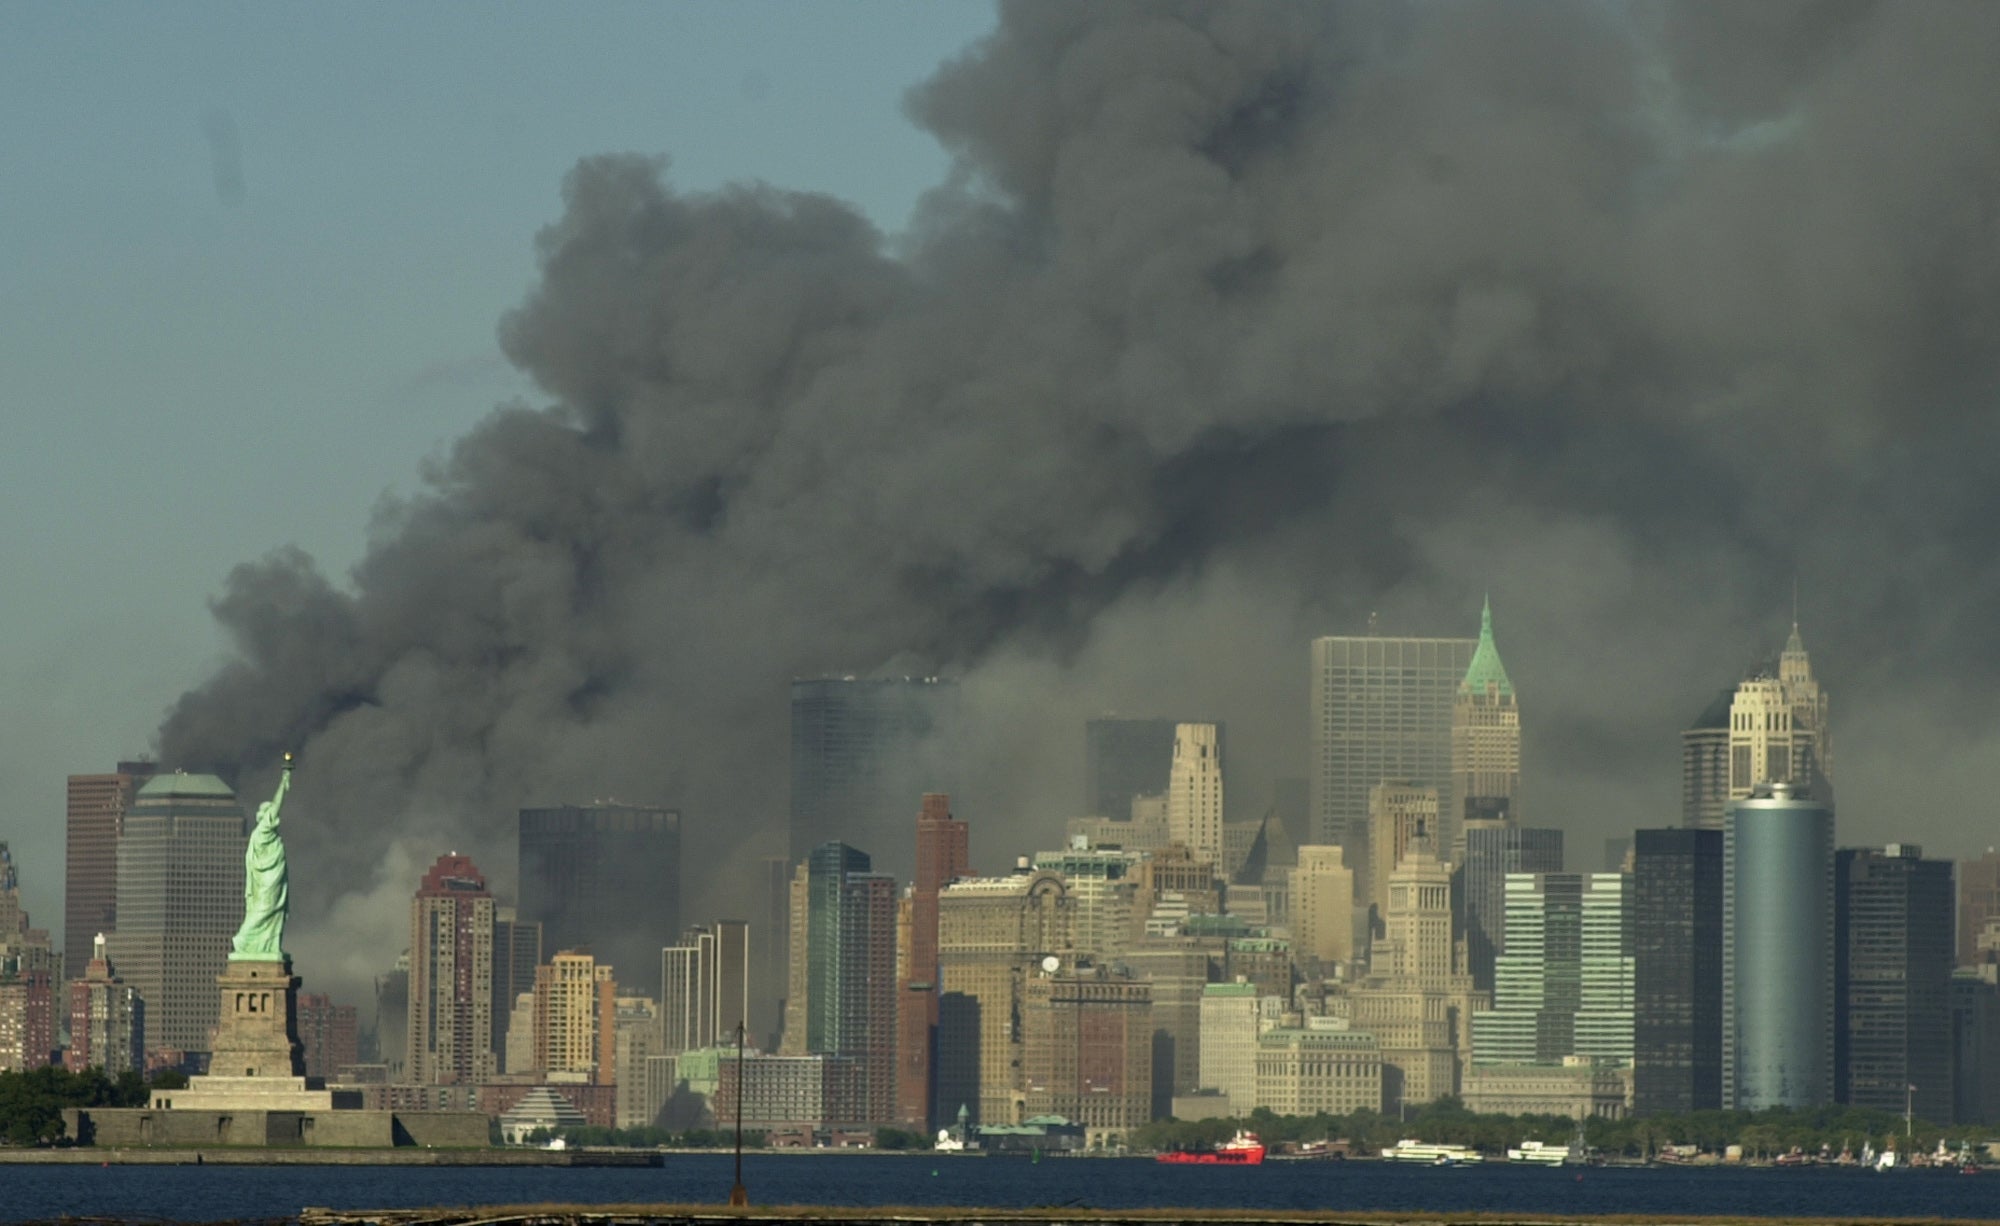 Thick smoke billows into the sky from where the World Trade Center towers stood on 11 September 2001